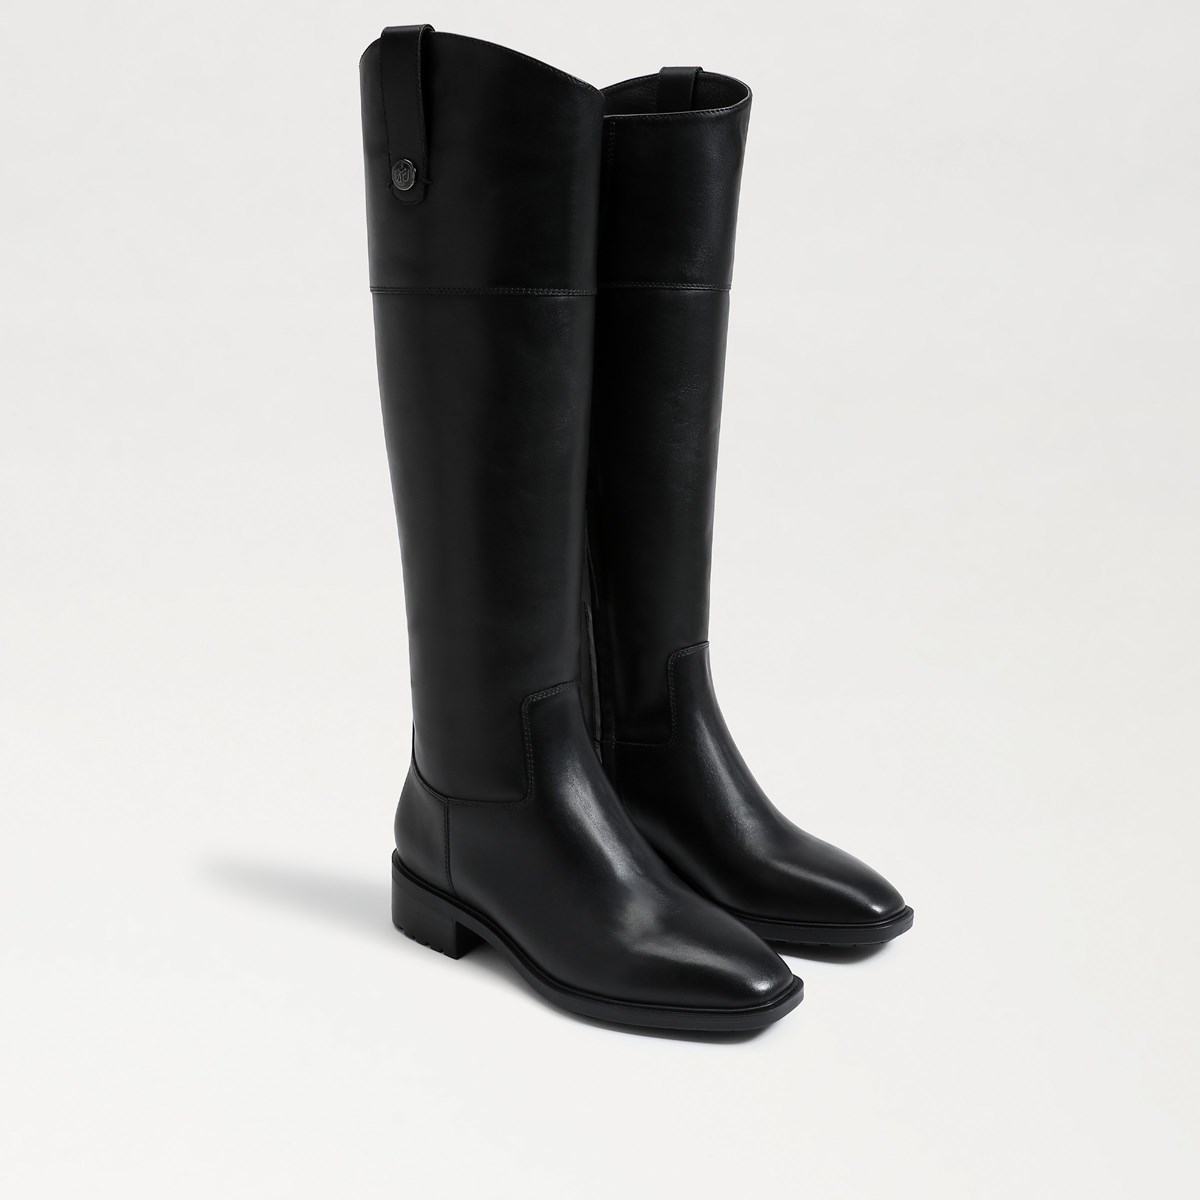 Sam Edelman Drina Riding Boot, Black | Womens Boots and Booties